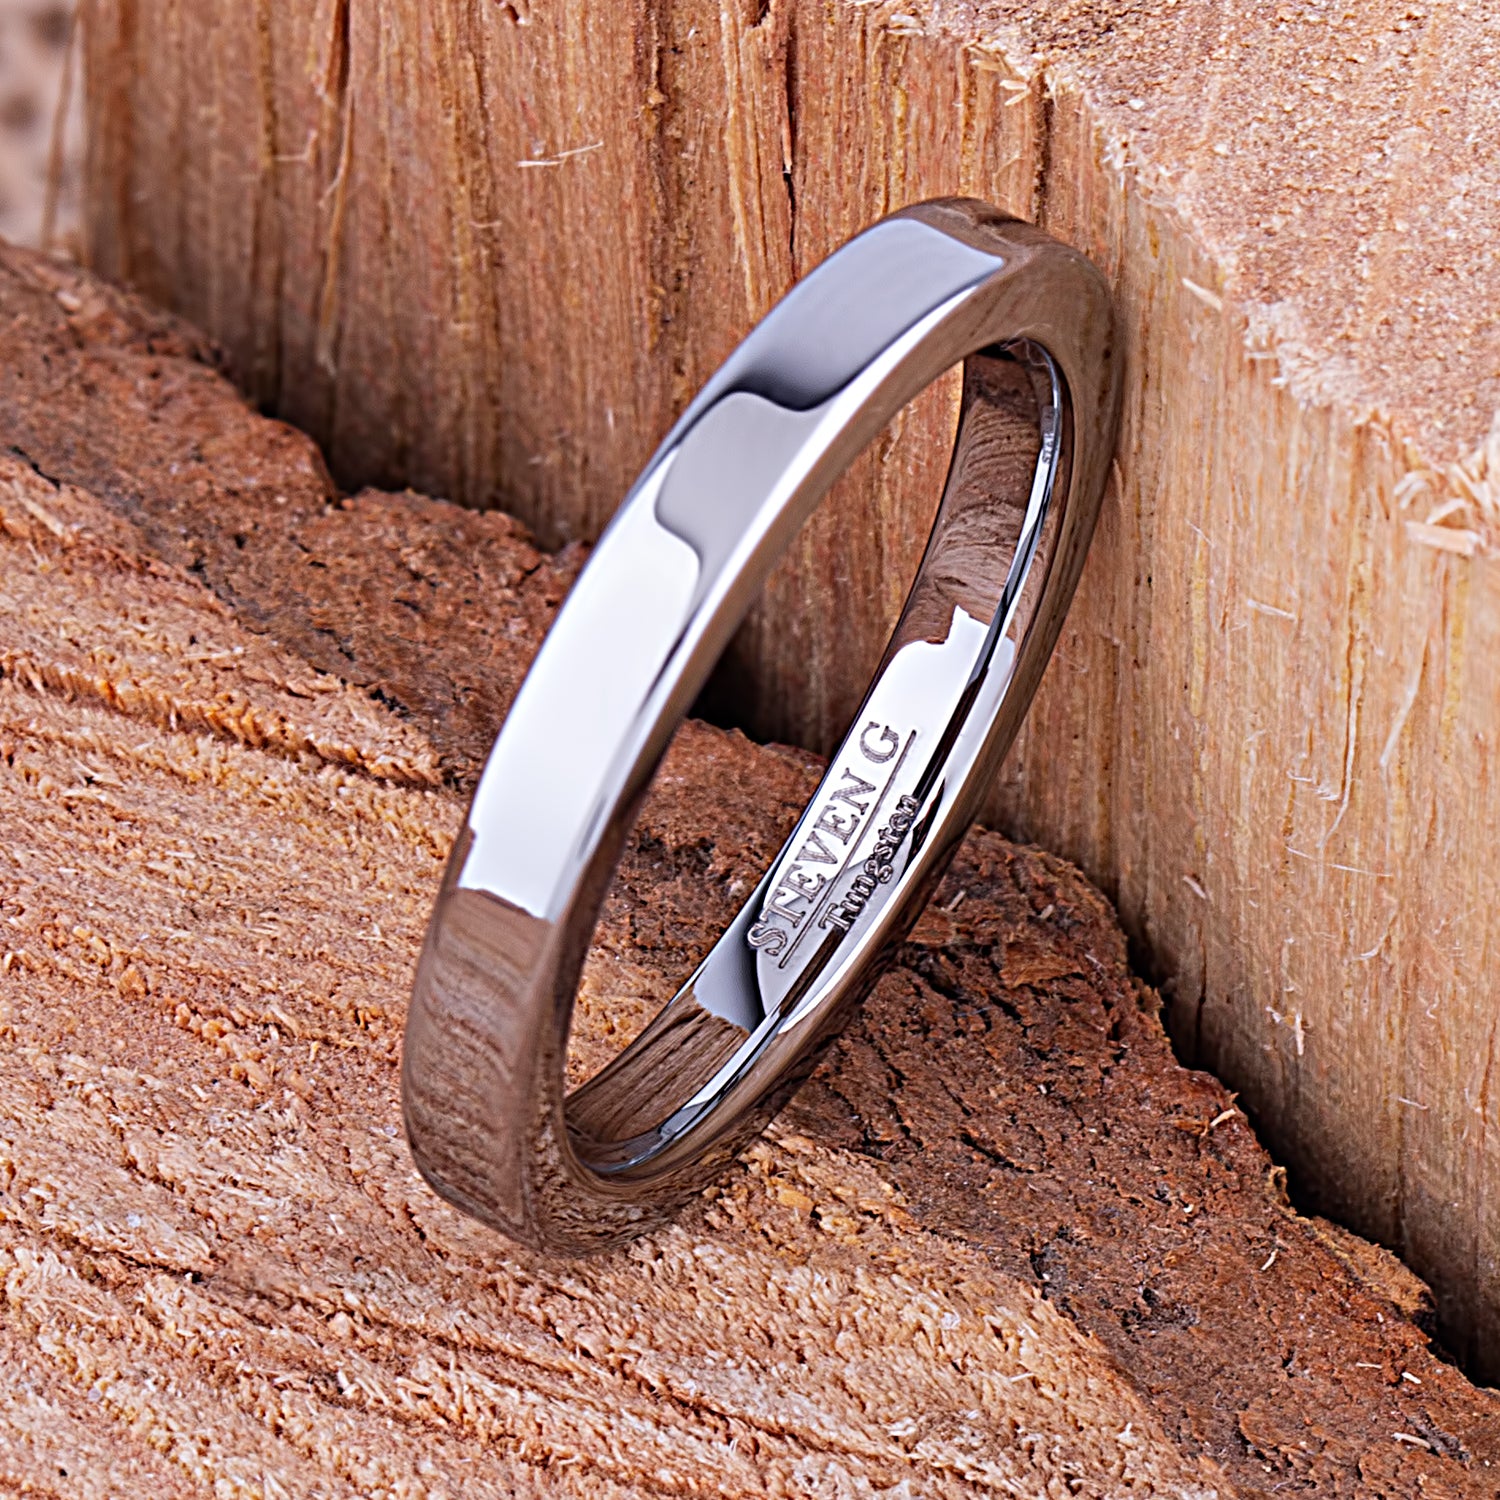 Tungsten Unisex Ring 3mm - TCR118 traditional men’s wedding or engagement band or promise ring for boyfriend